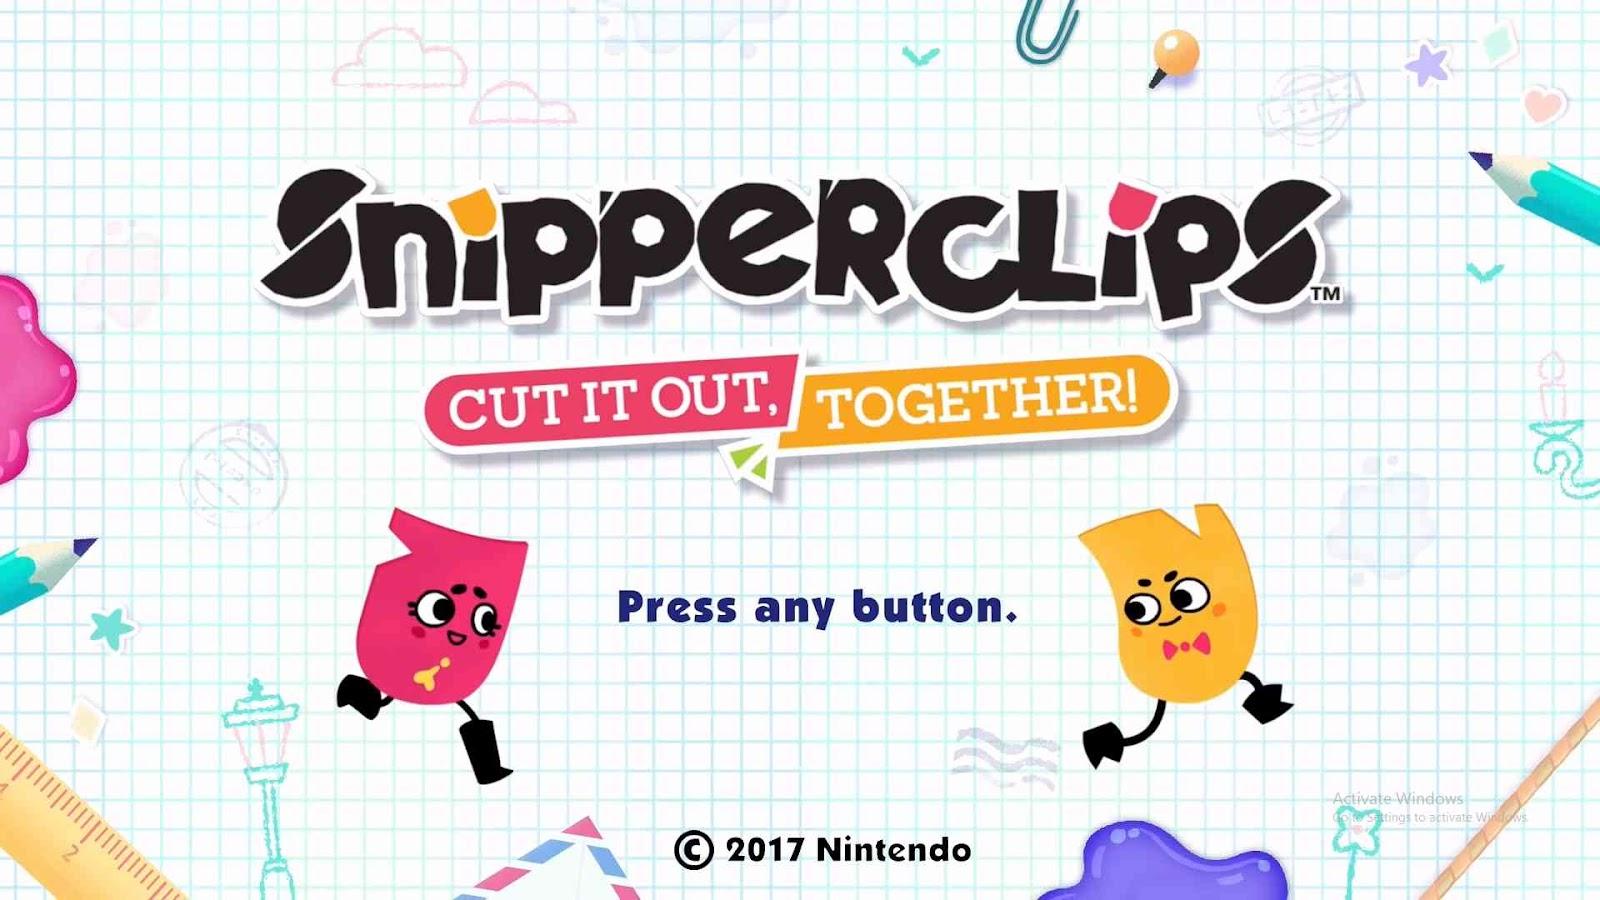 15. Snipperclips: Cut It Out Together